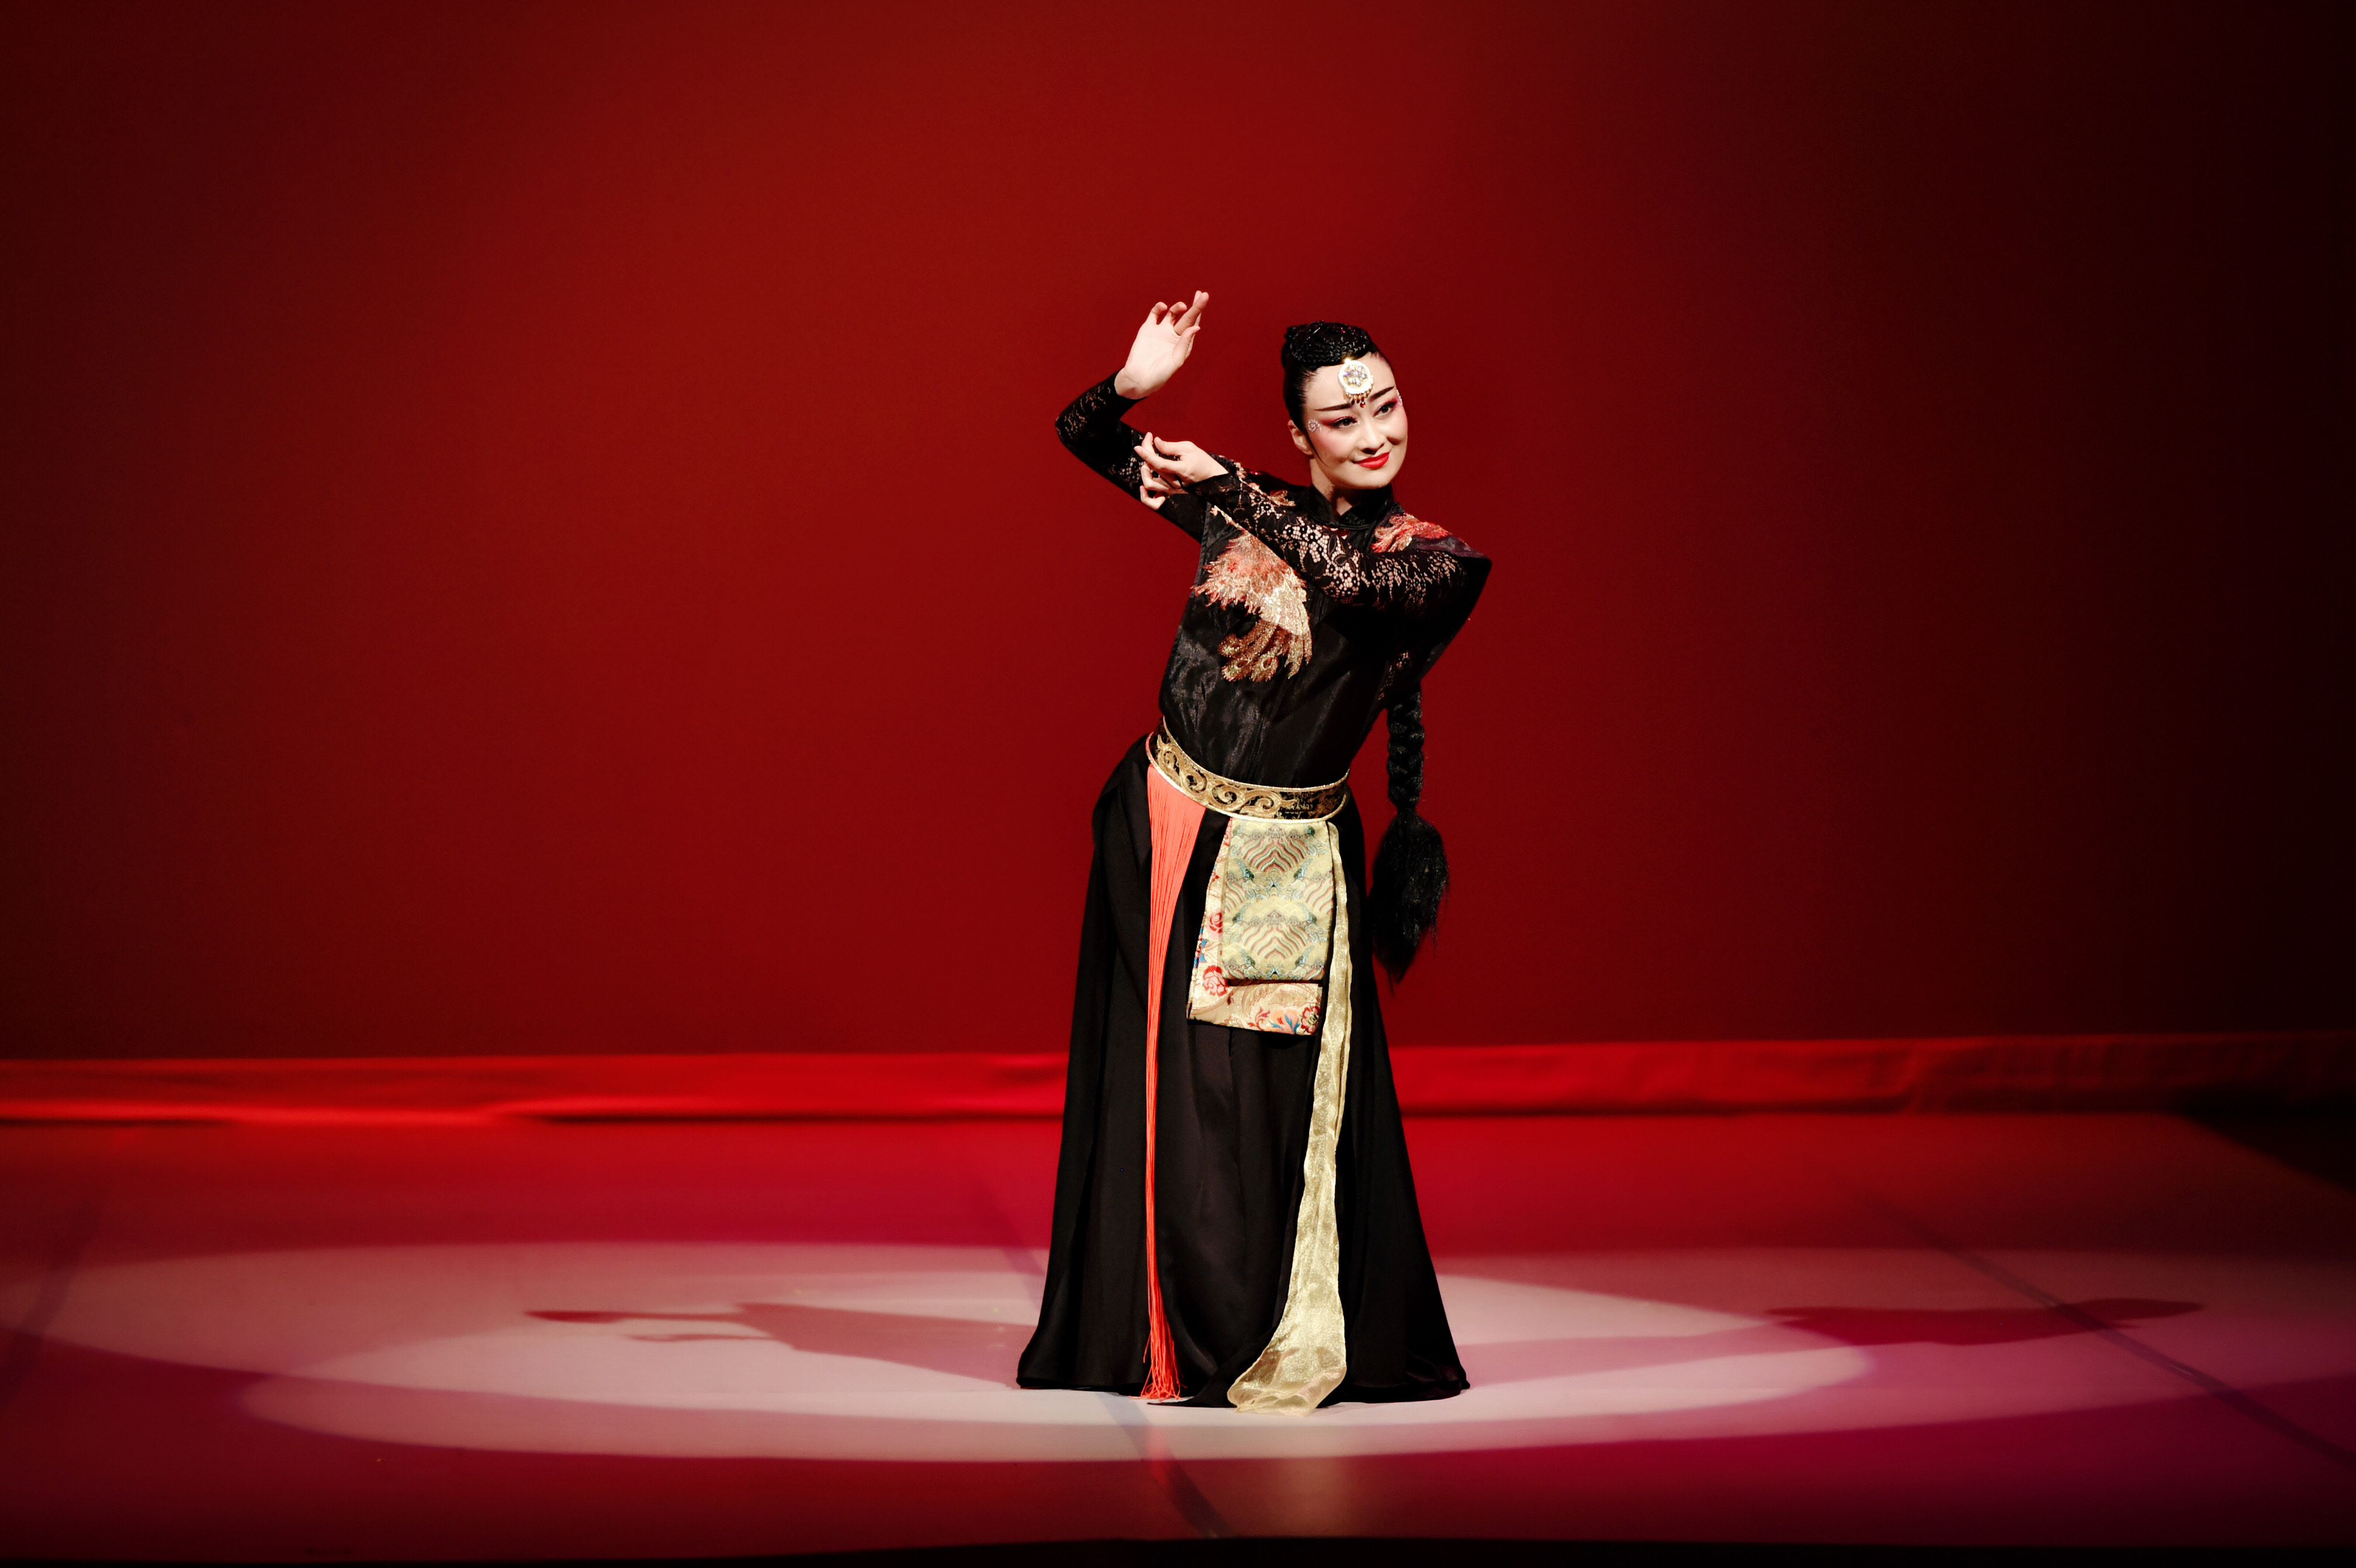 Feng Ye Dance Studio director brings Chinese and Mongolian dances to the festival | Courtesy of the artist